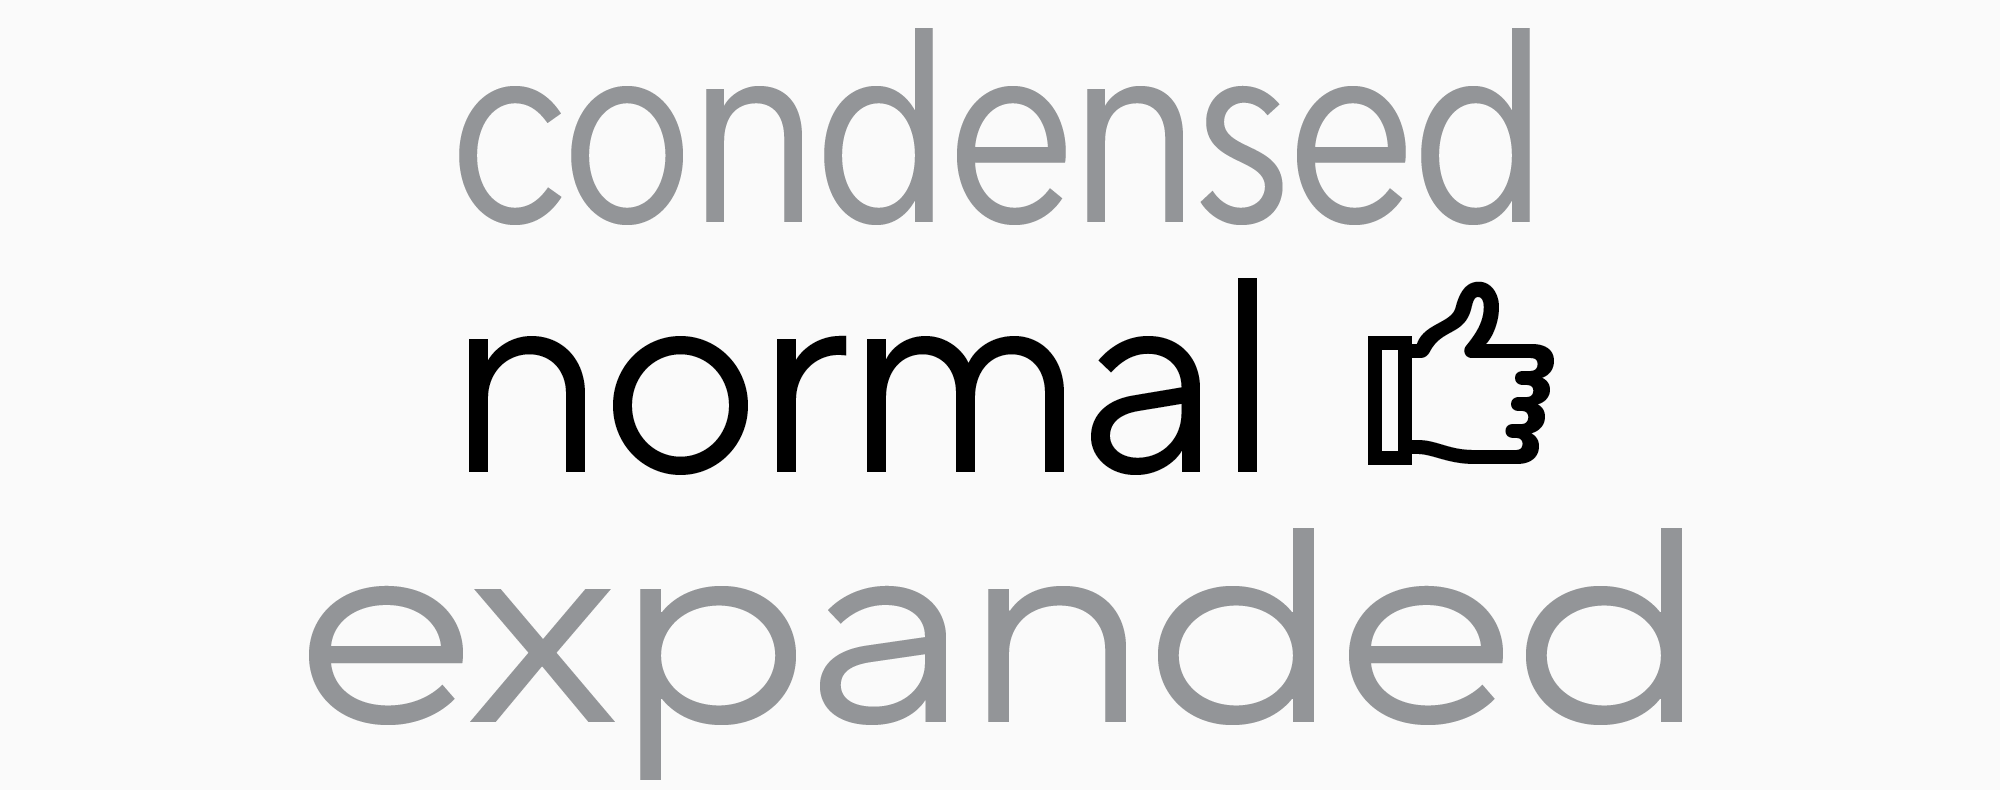 Condensed, Compact, Normal, Expanded, and Mono subfamilies